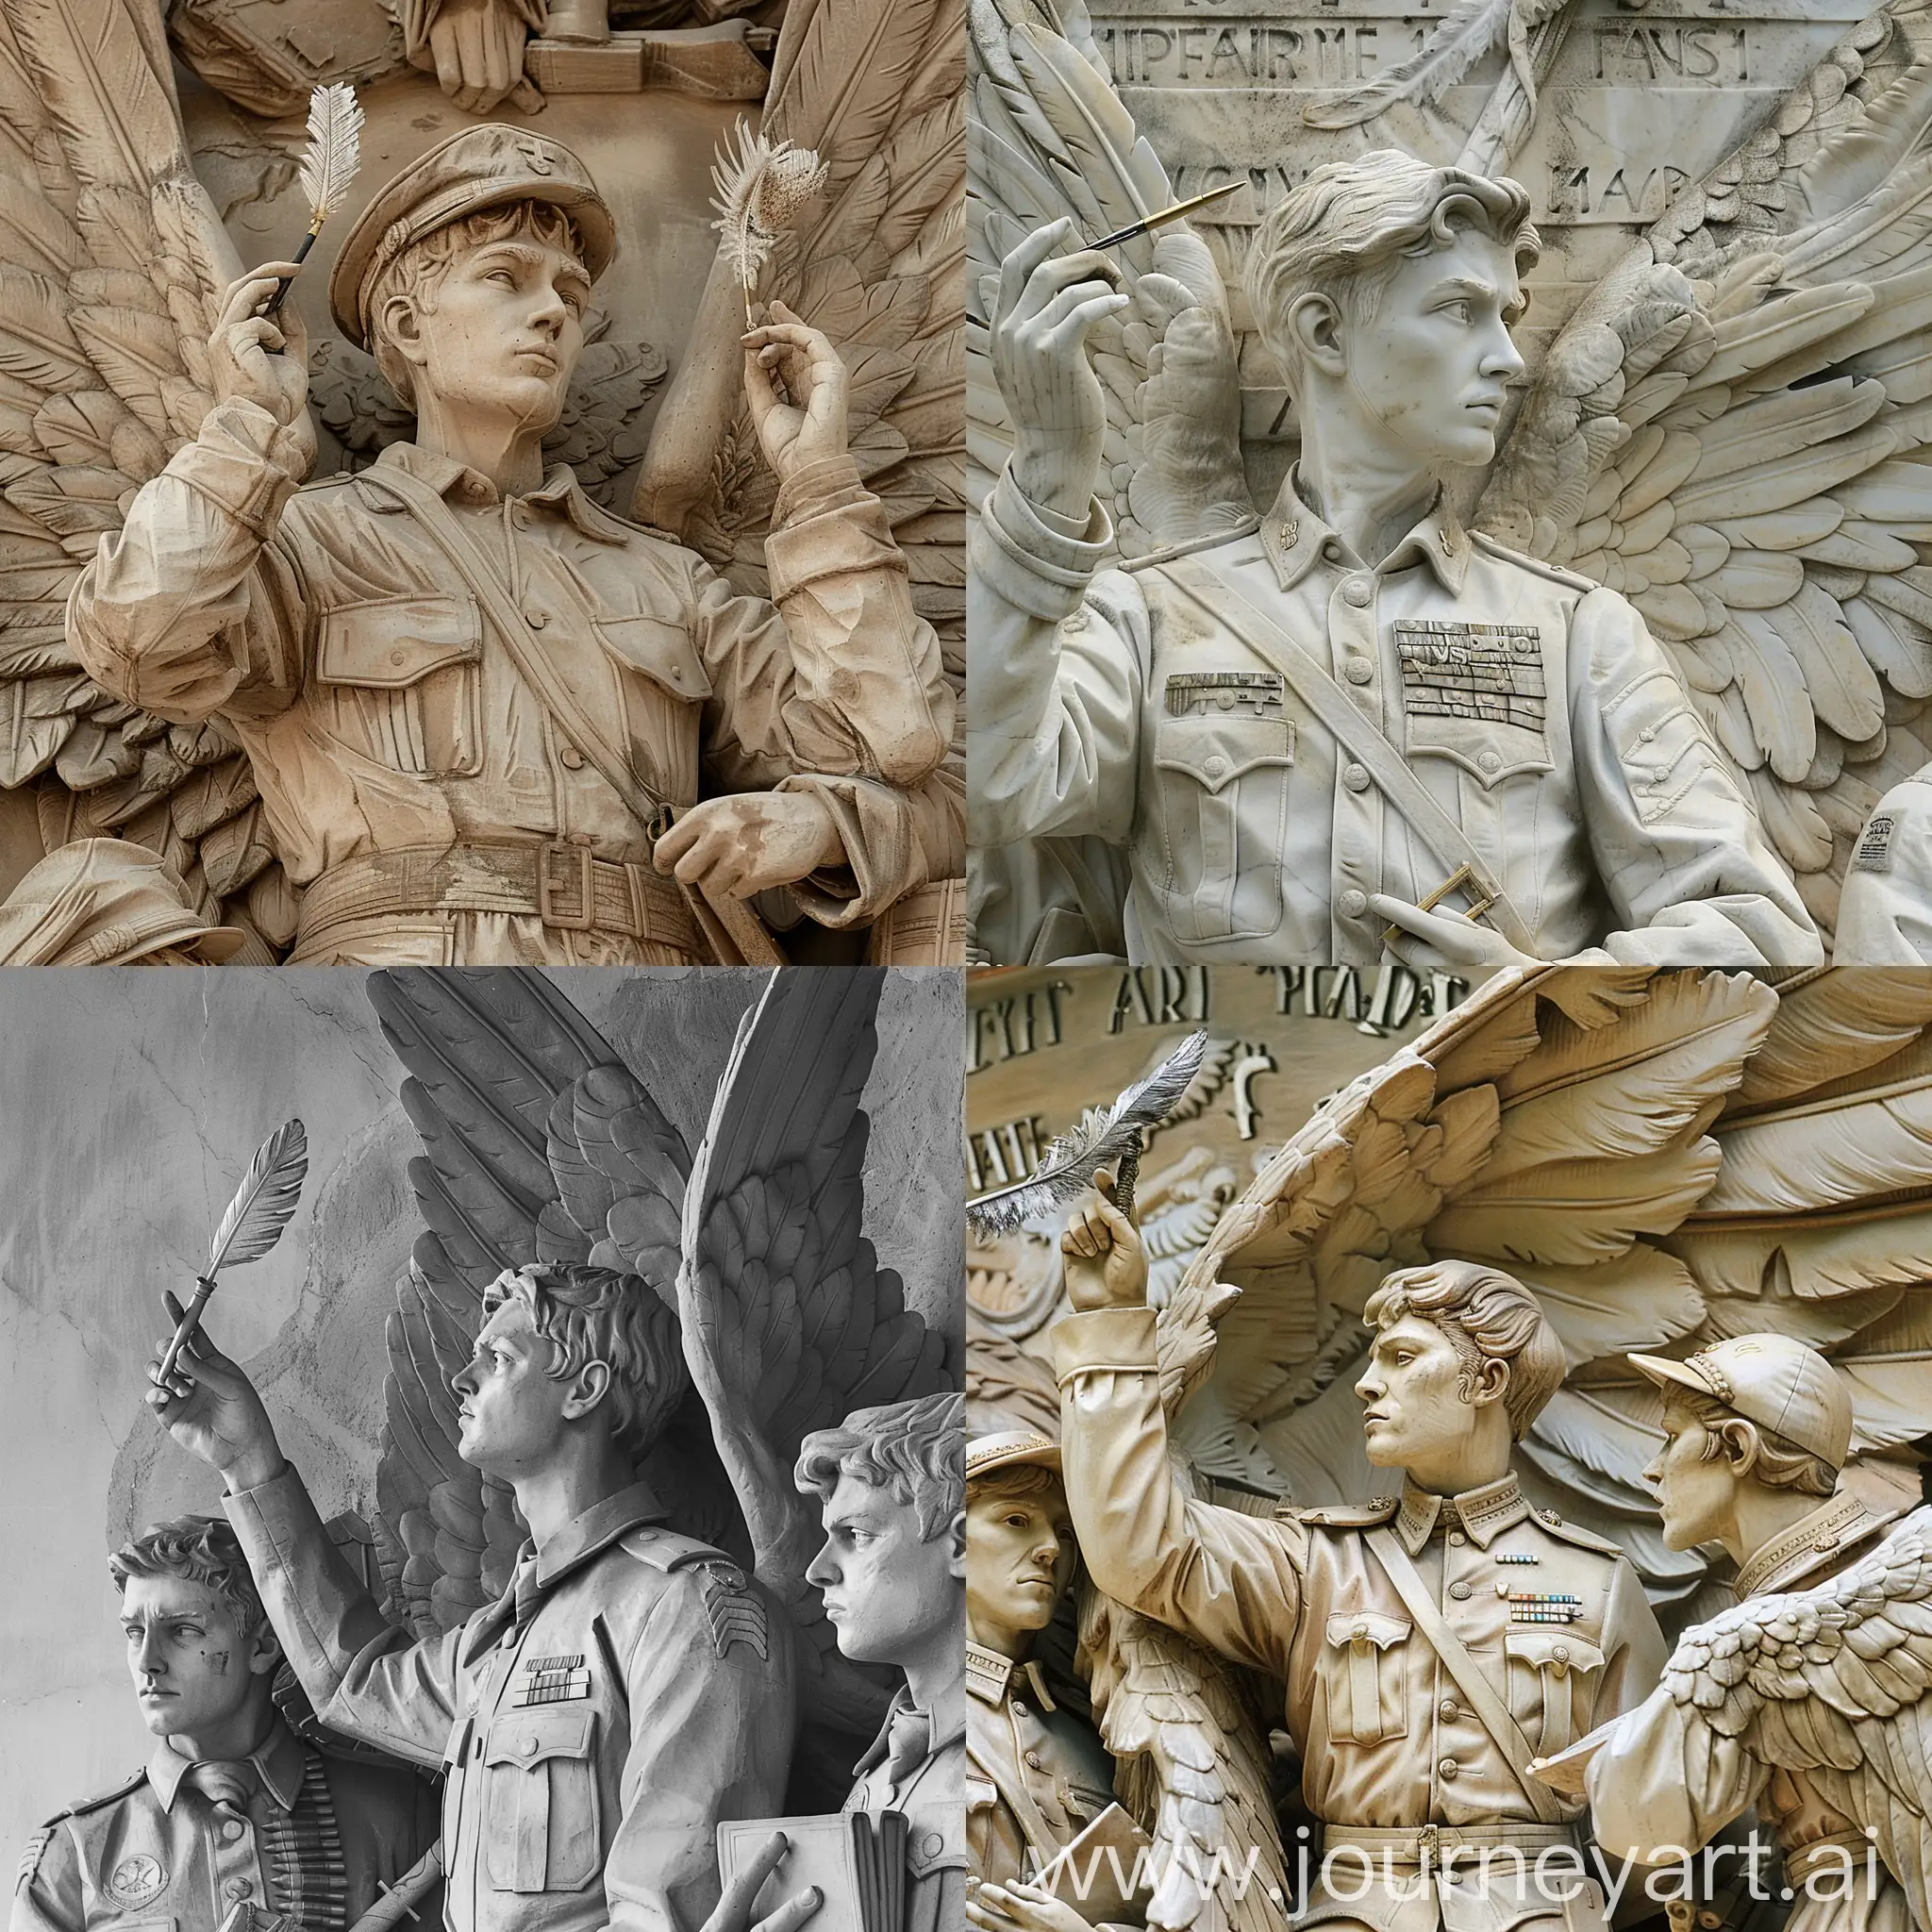 military college cadet,monumental sculpture, celebrating 100 years of the college,In decorated uniform, thinking about the country, holding pen like gun, instructing other students, pointing a feather pen to the sky, holding a book in his hand, the cadets having large wide opened wings